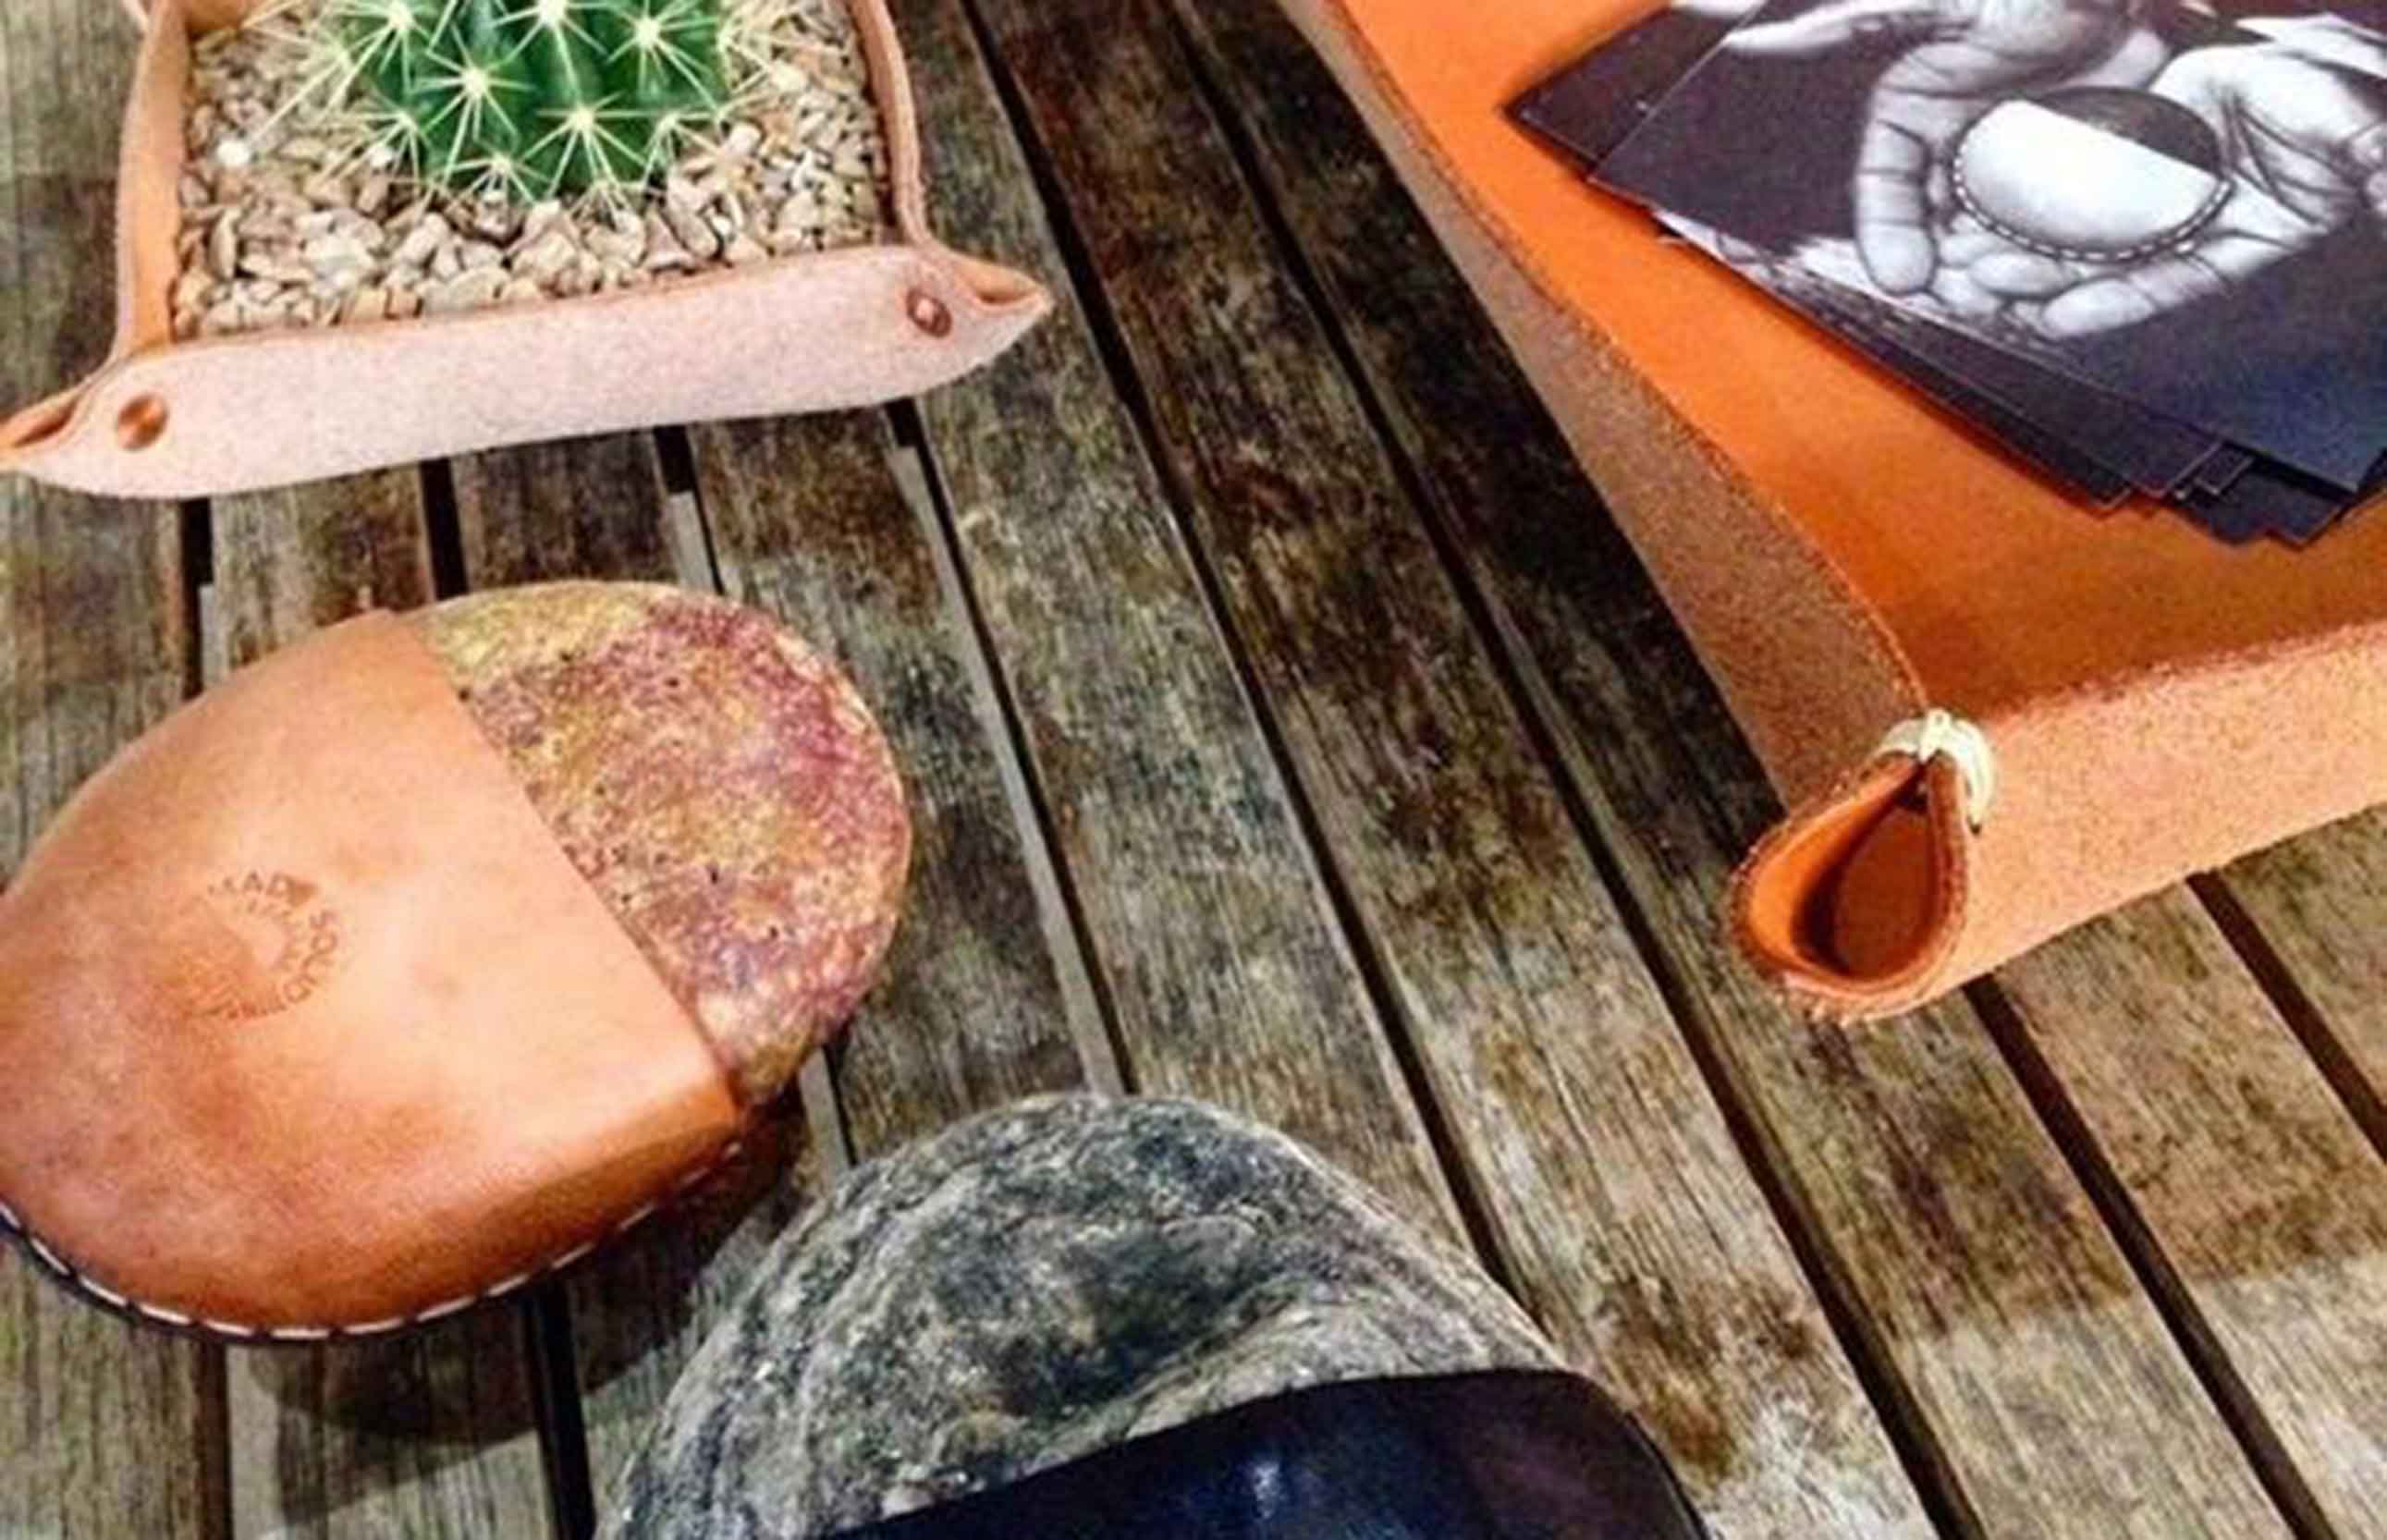 Nordstrom is selling an $85 rock — it's wrapped in leather, but still it's an $85 rock.